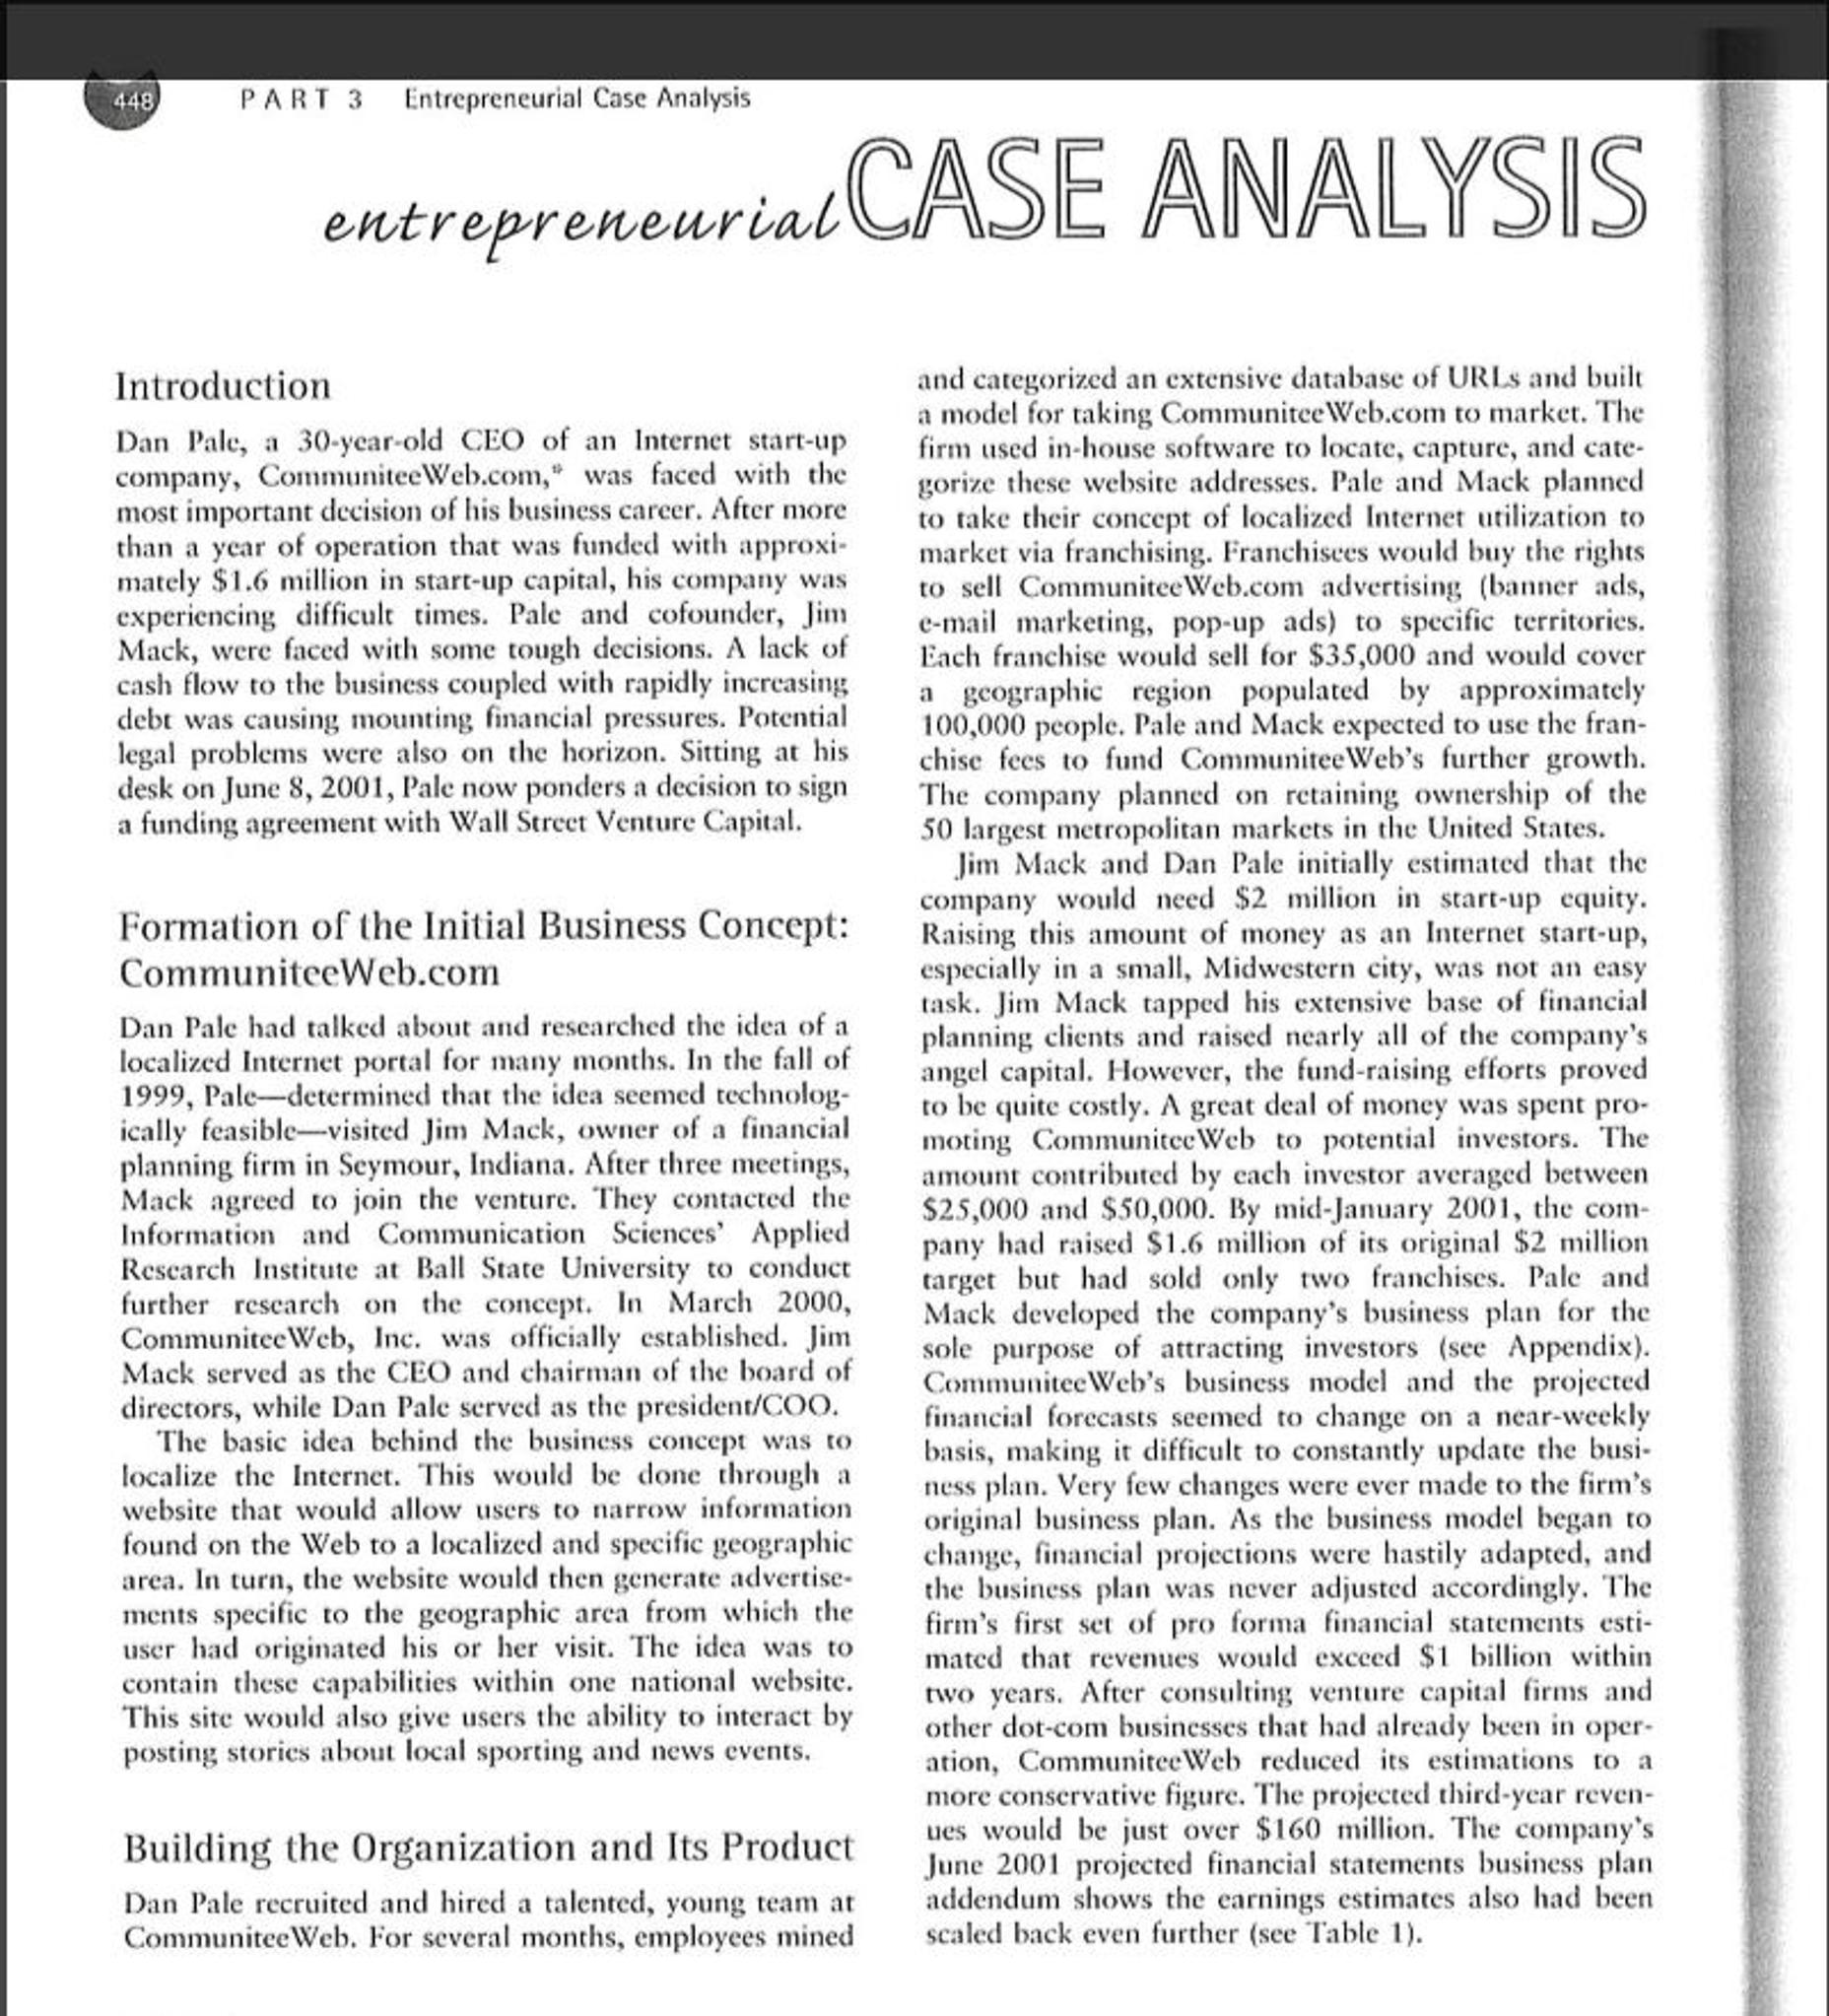 Entrepreneurial Case Analysis from the Textbook -